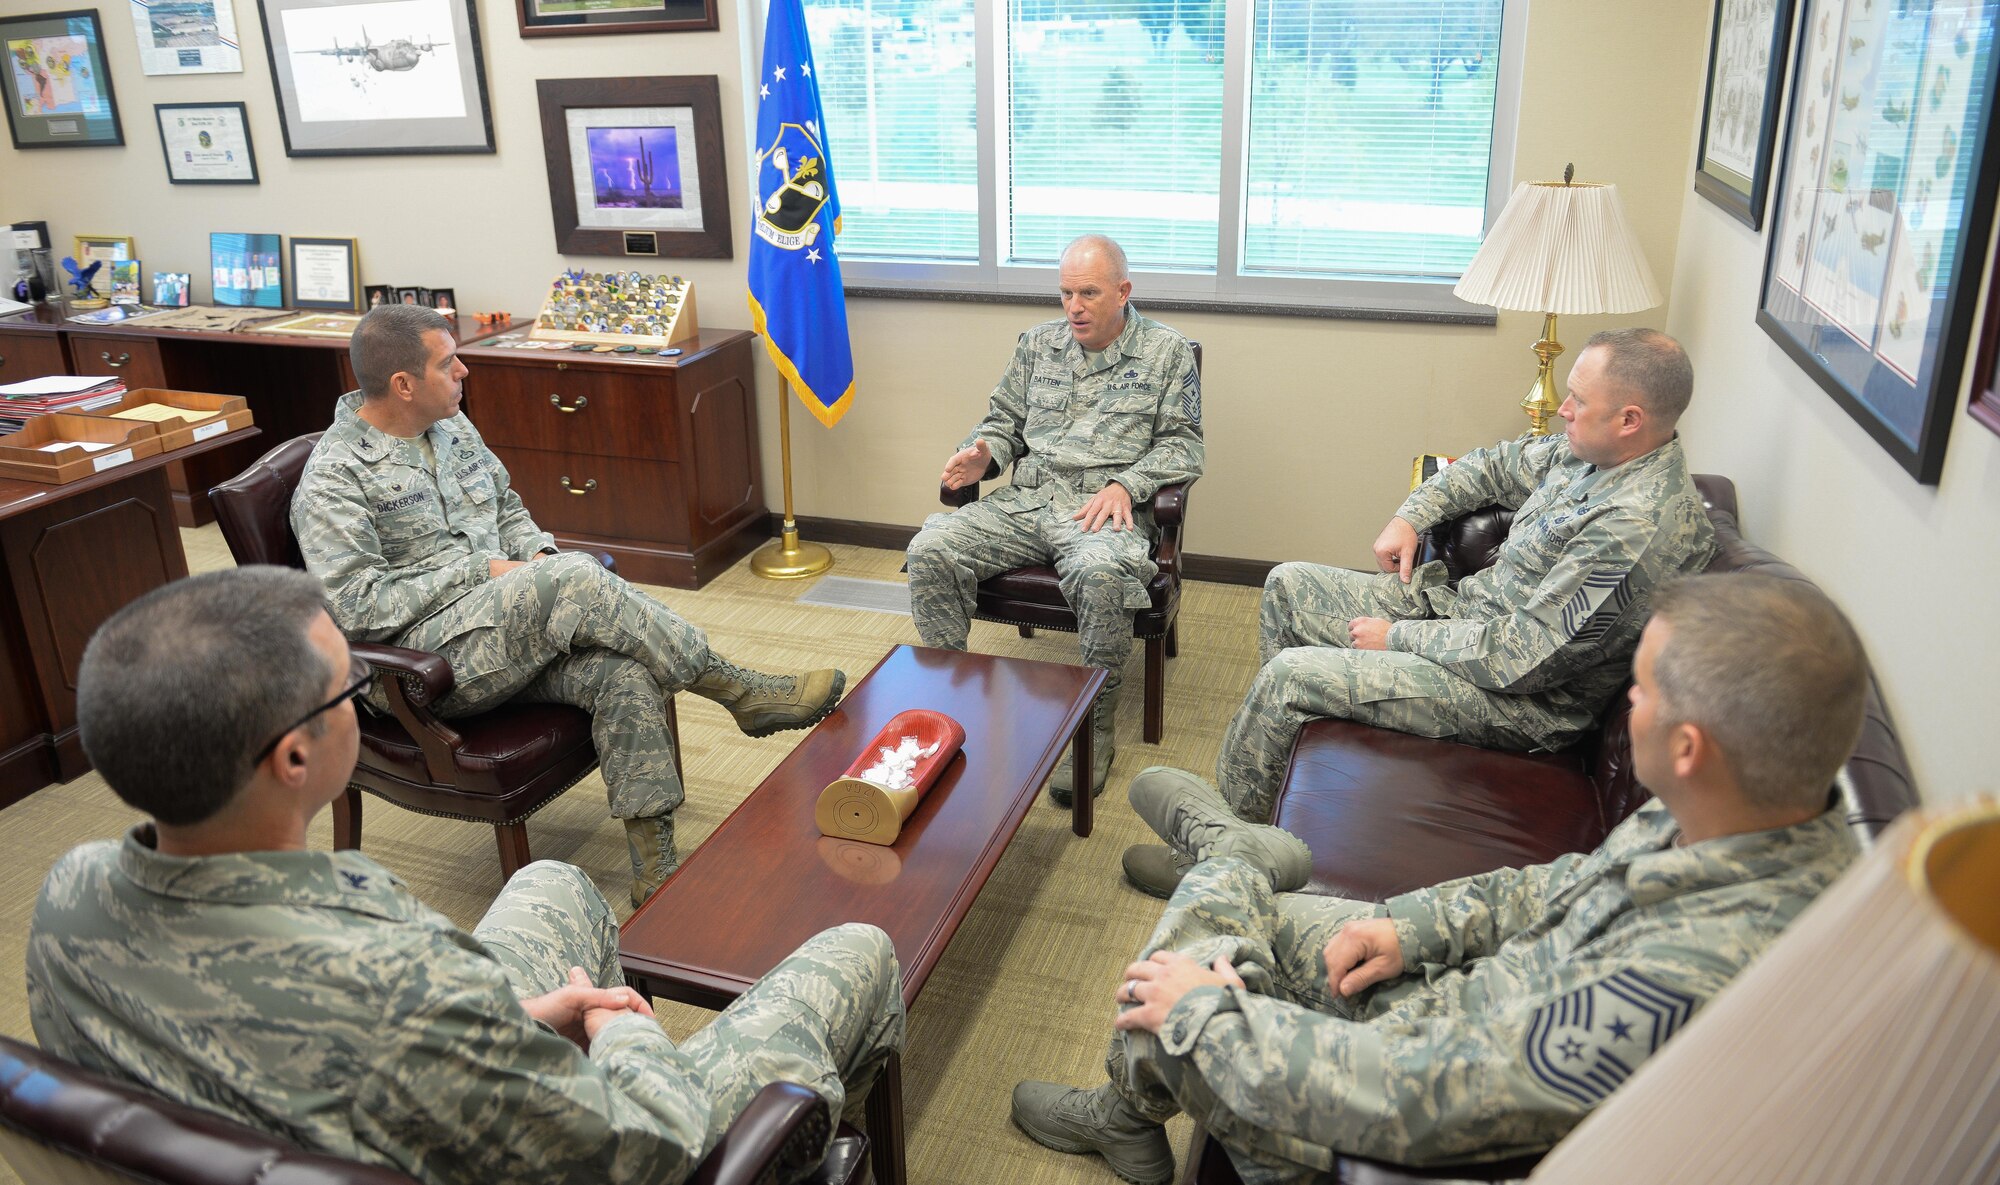 Command Chief Master Sgt. Frank Batten III, center, Air Combat Command's command chief, speaks with senior leaders of the 557th Weather Wing, including Col. Steven Dickerson, 557th WW commander, second from left, at Offutt Air Force Base, Oct. 4, 2017. Batten came to Offutt to see and experience all the base had to offer, and to meet the Airmen that drive the mission.